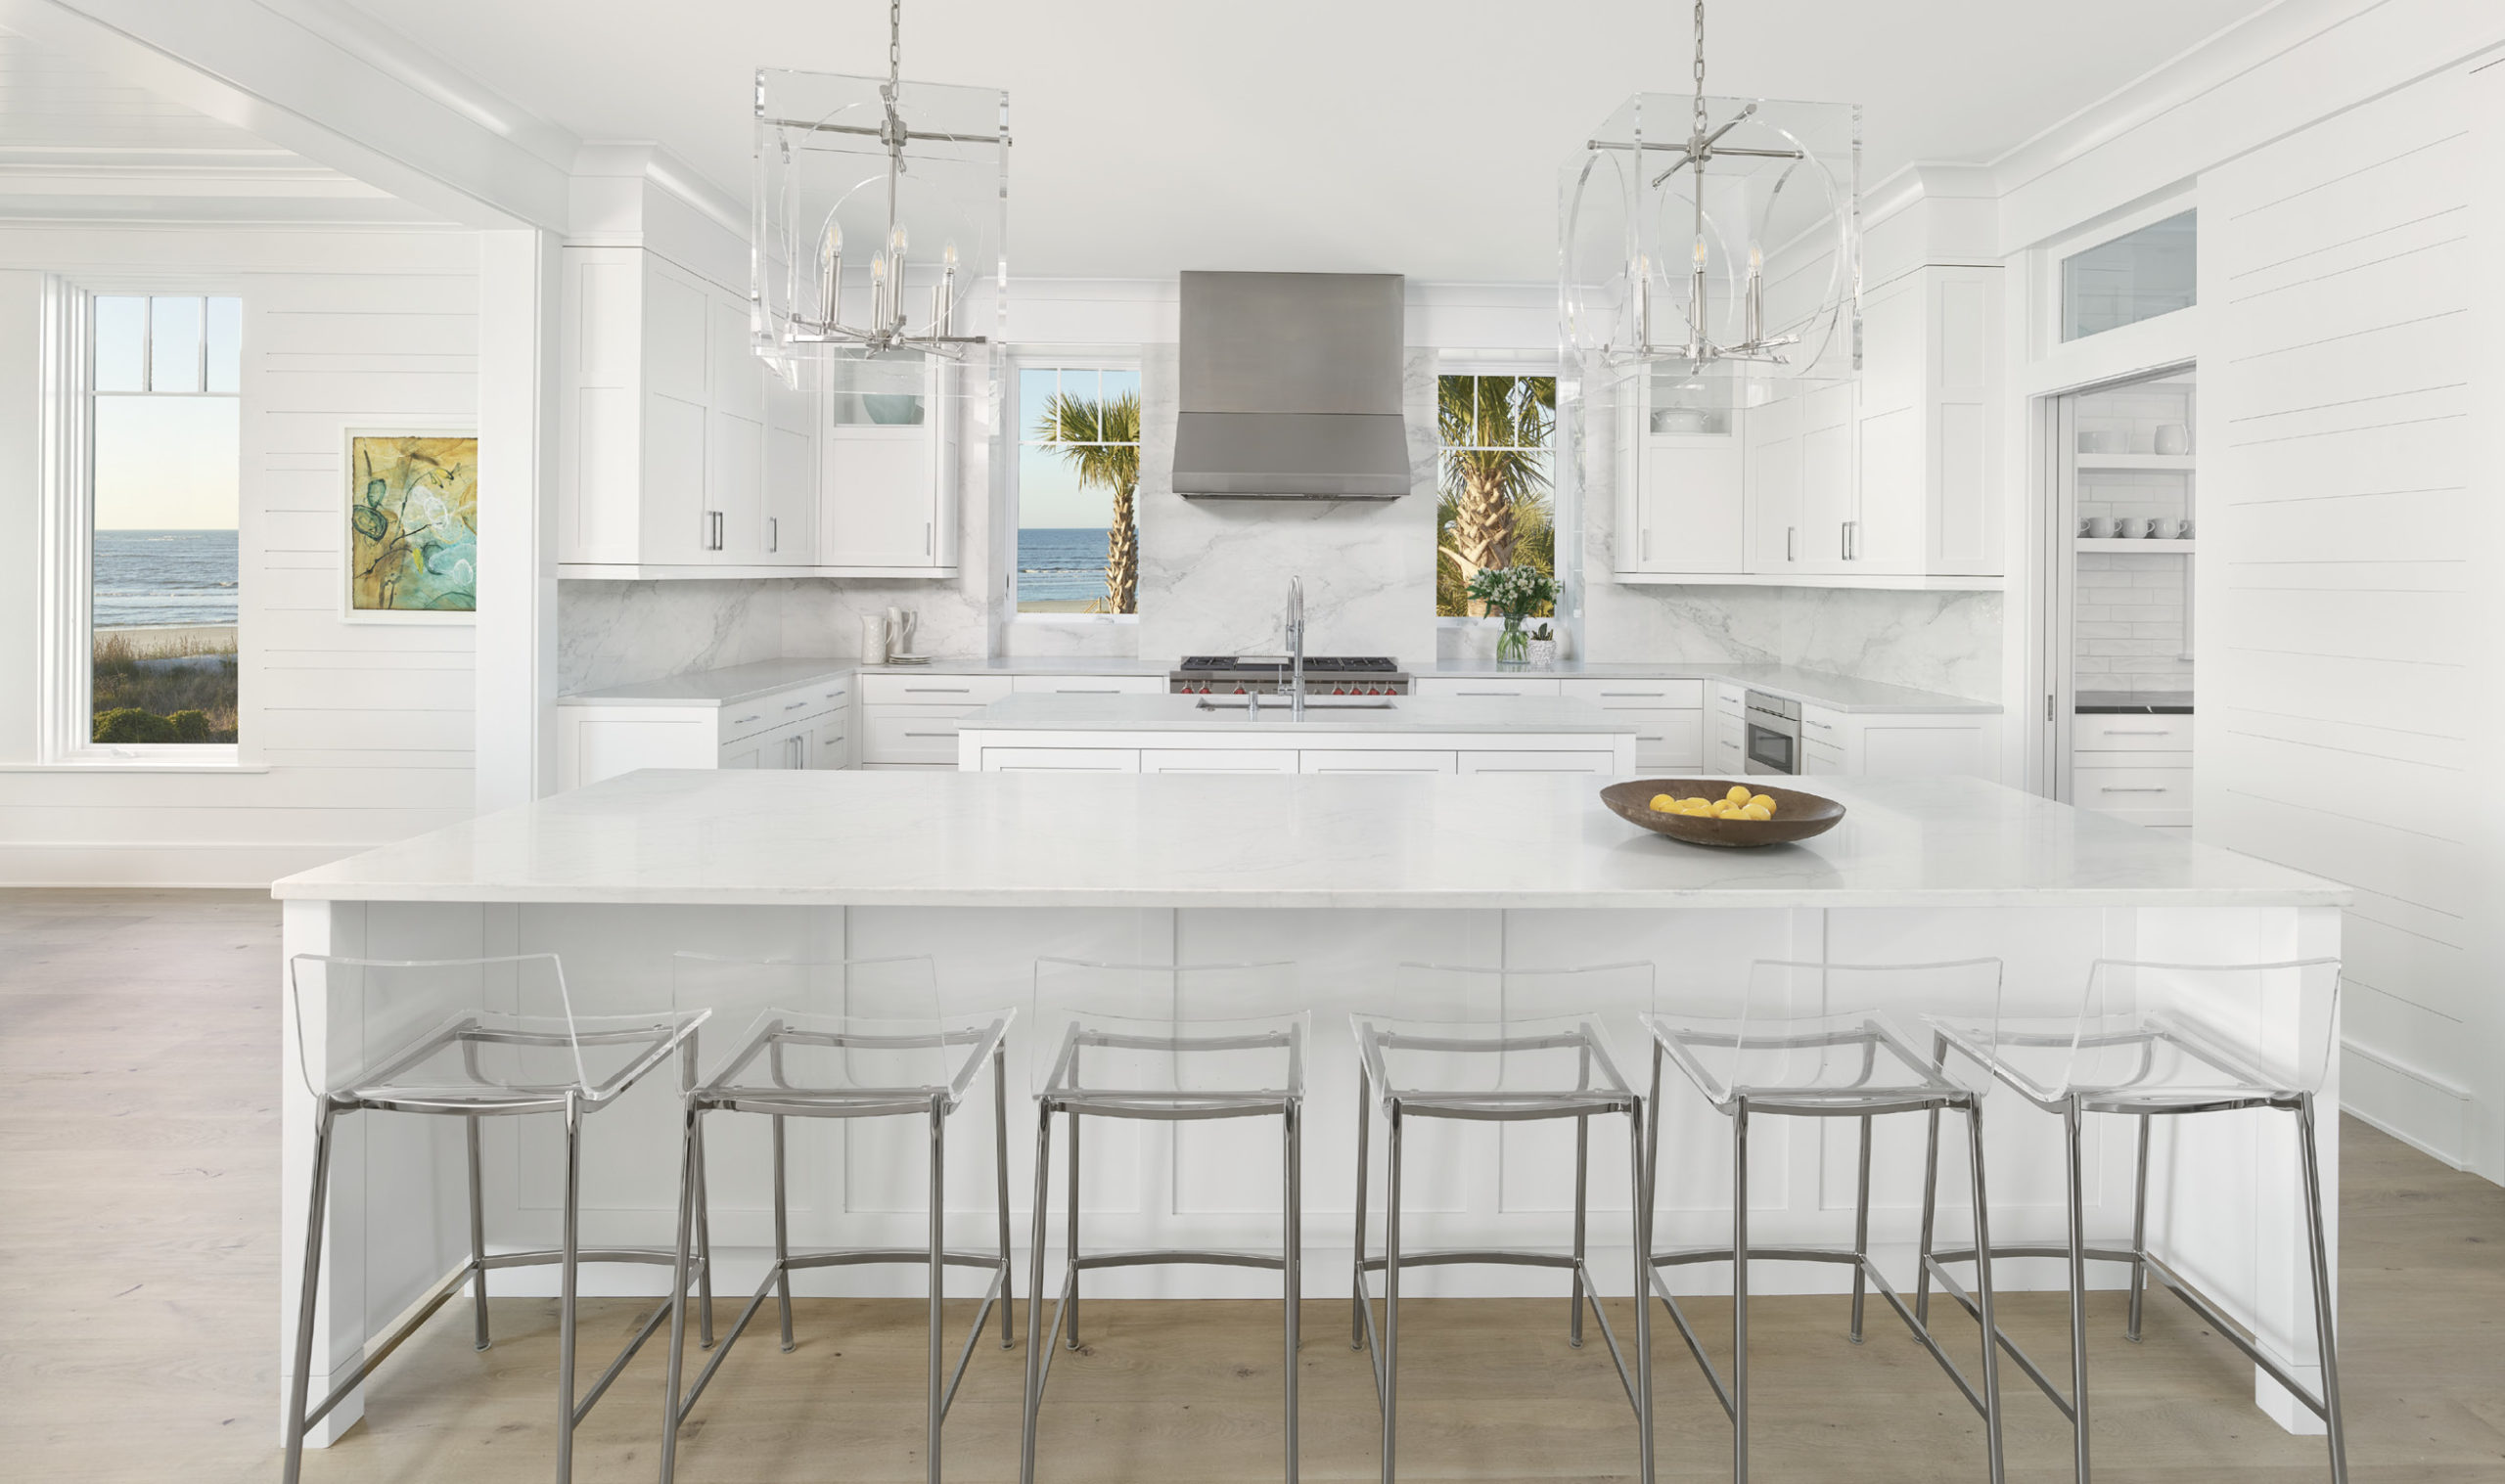 The kitchen was designed with simplicity and durability in mind, with quartz countertops and islands, a marble backsplash and easy-to-clean acrylic counter seating.